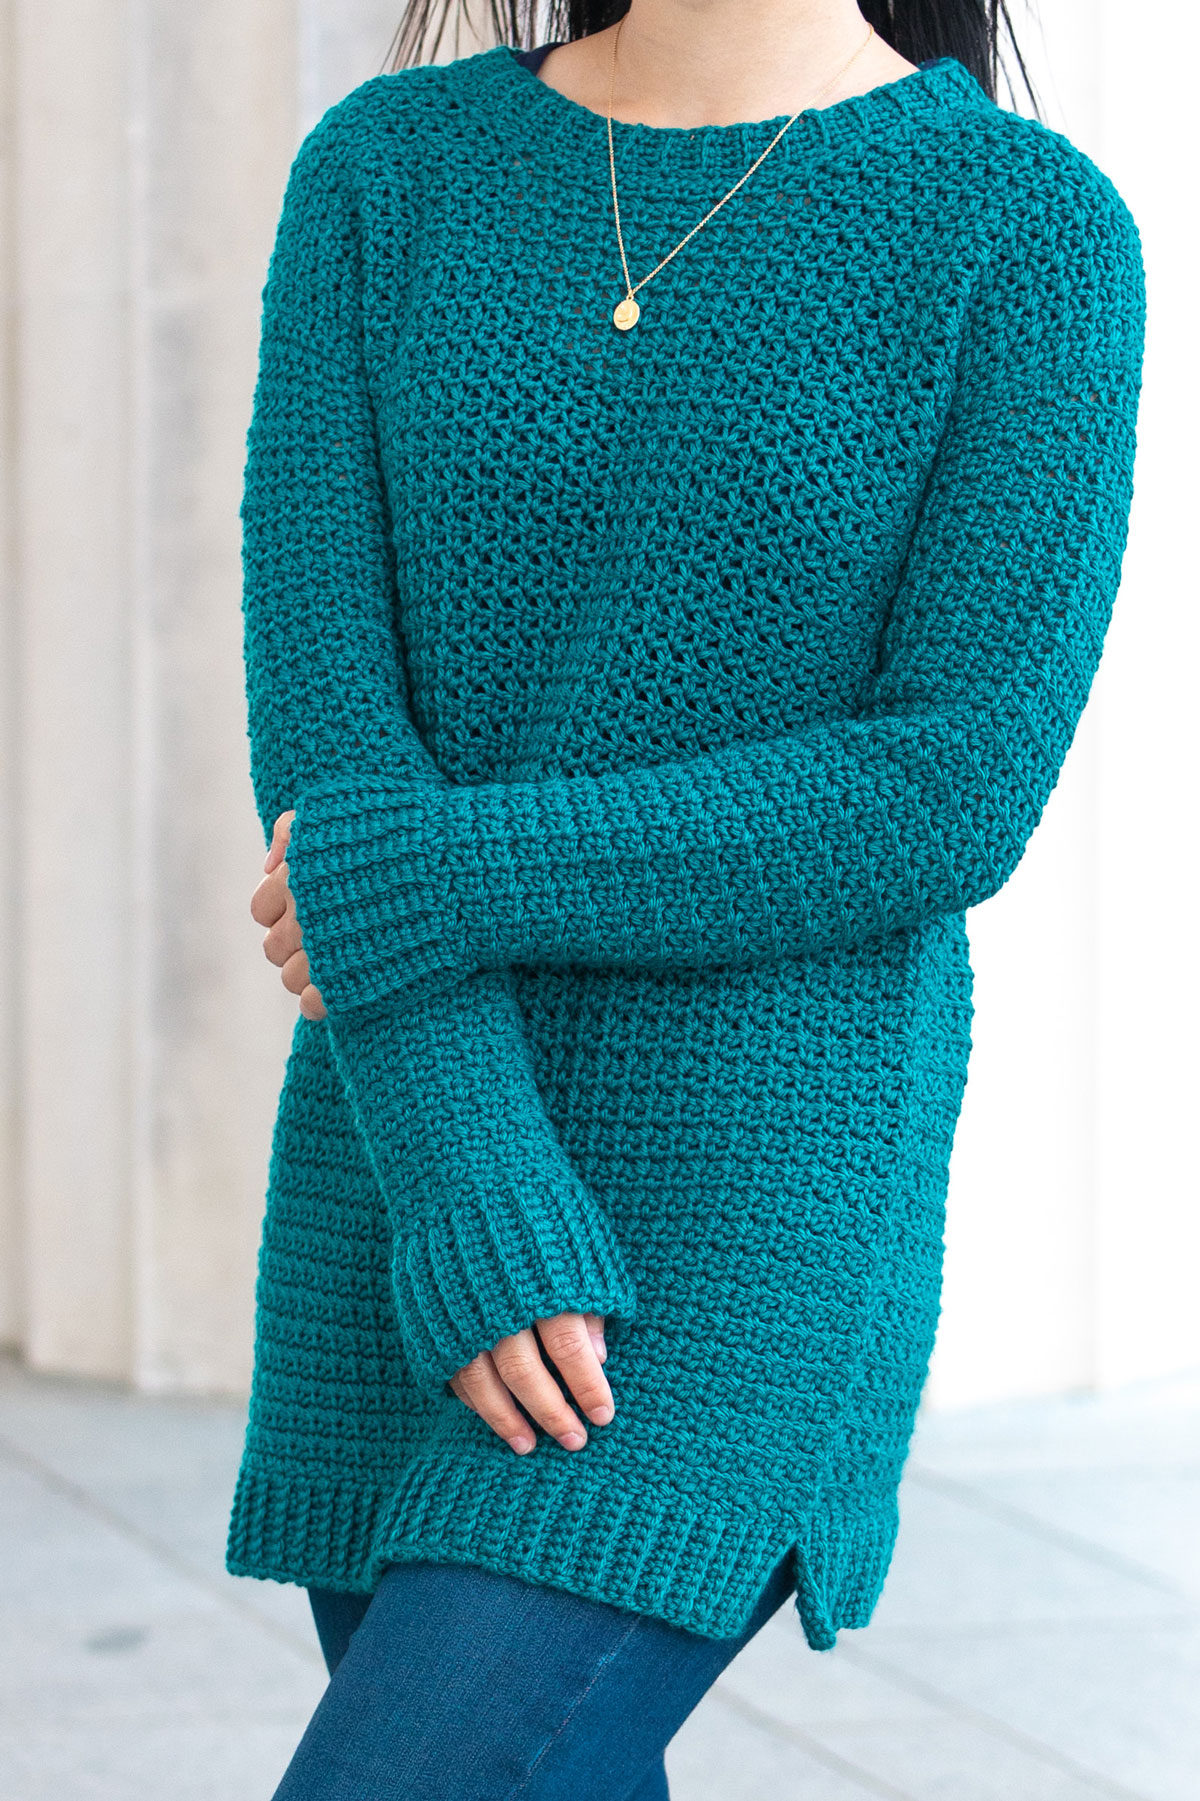 Weekend Snuggle Sweater - free crochet pattern - for the frills